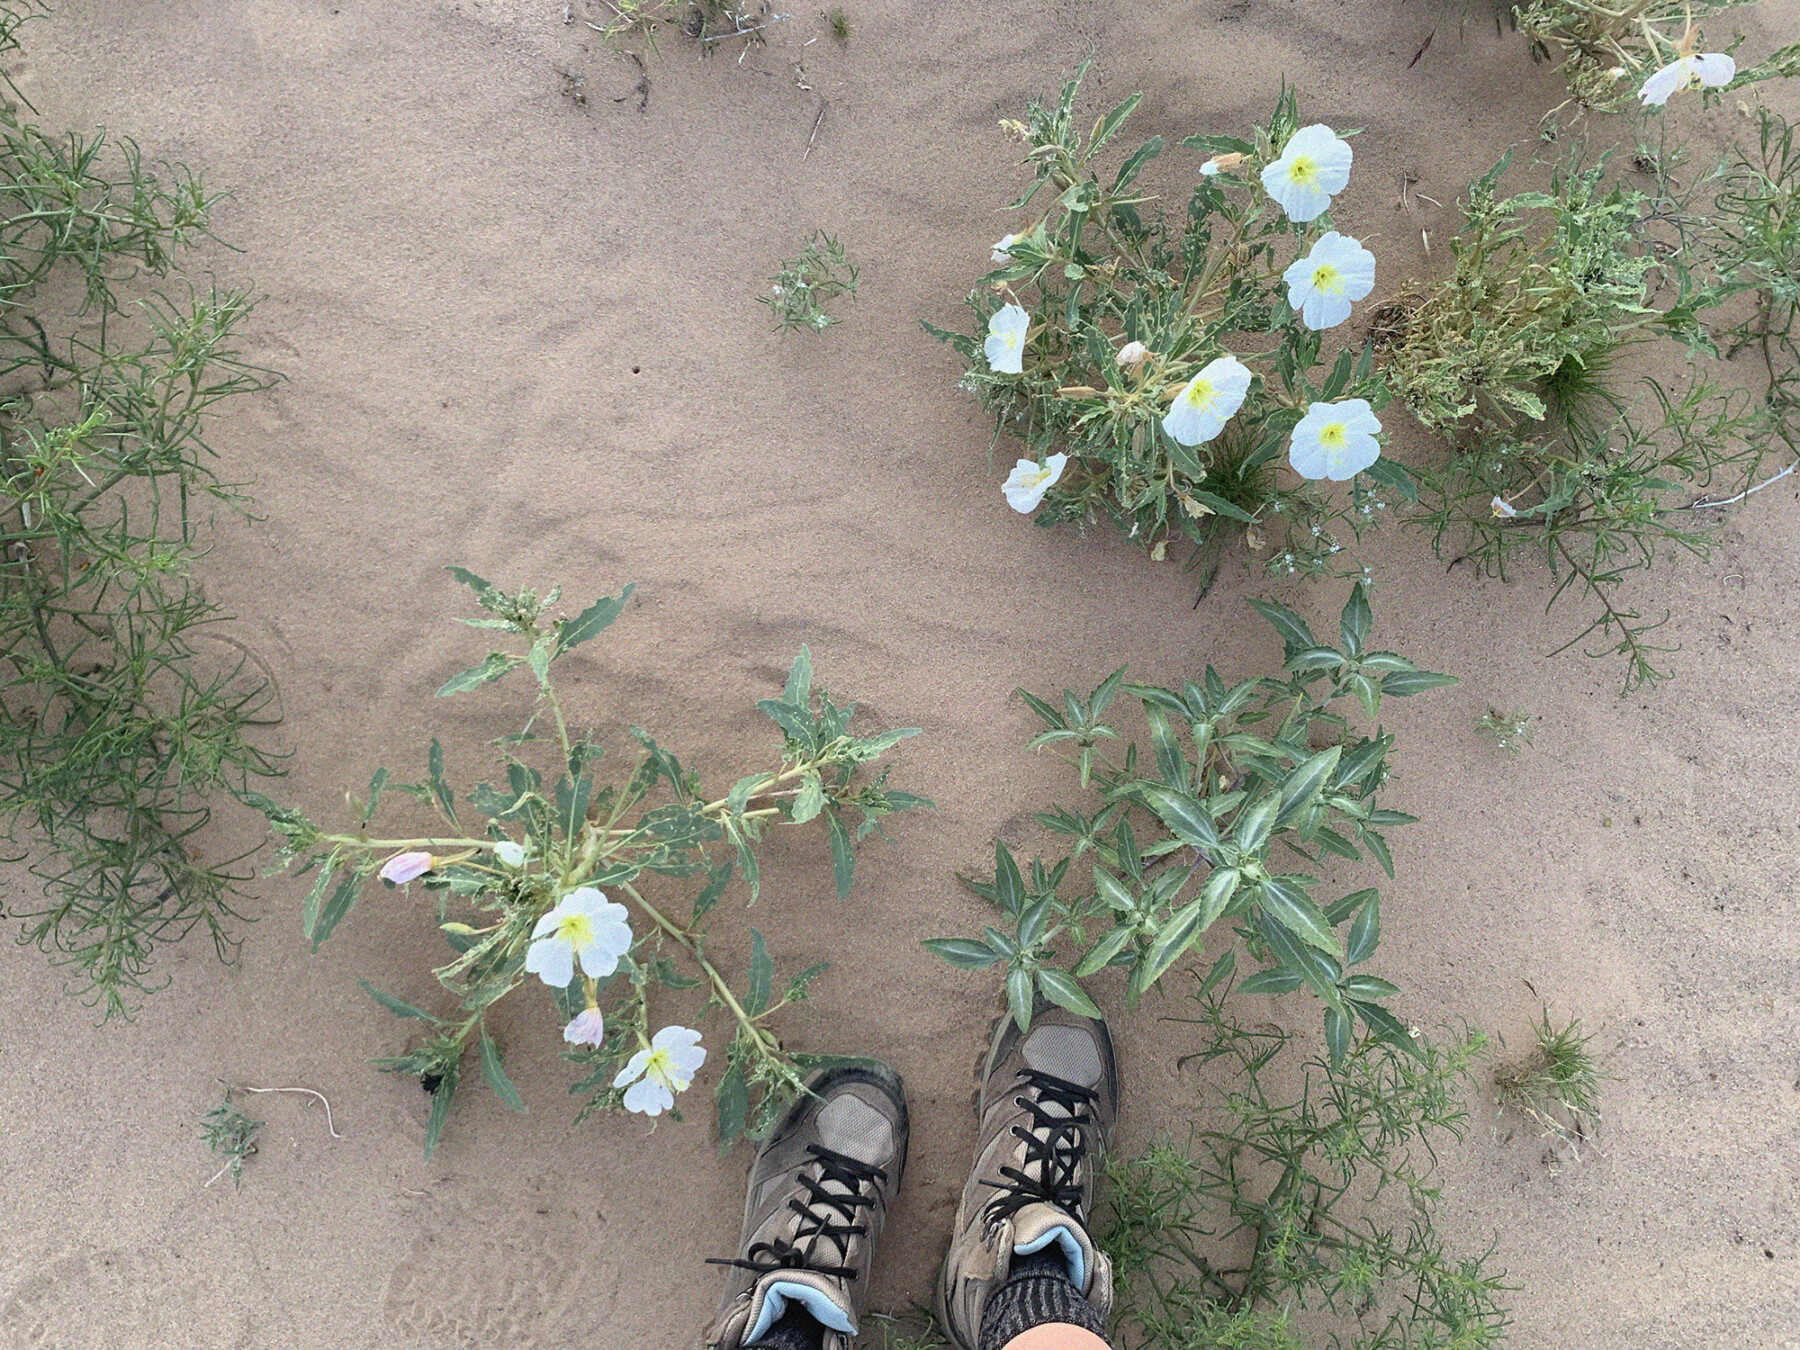 View from above of a hiker's boots and some desert vegetation in bloom at Cadiz Sand Dunes, California.